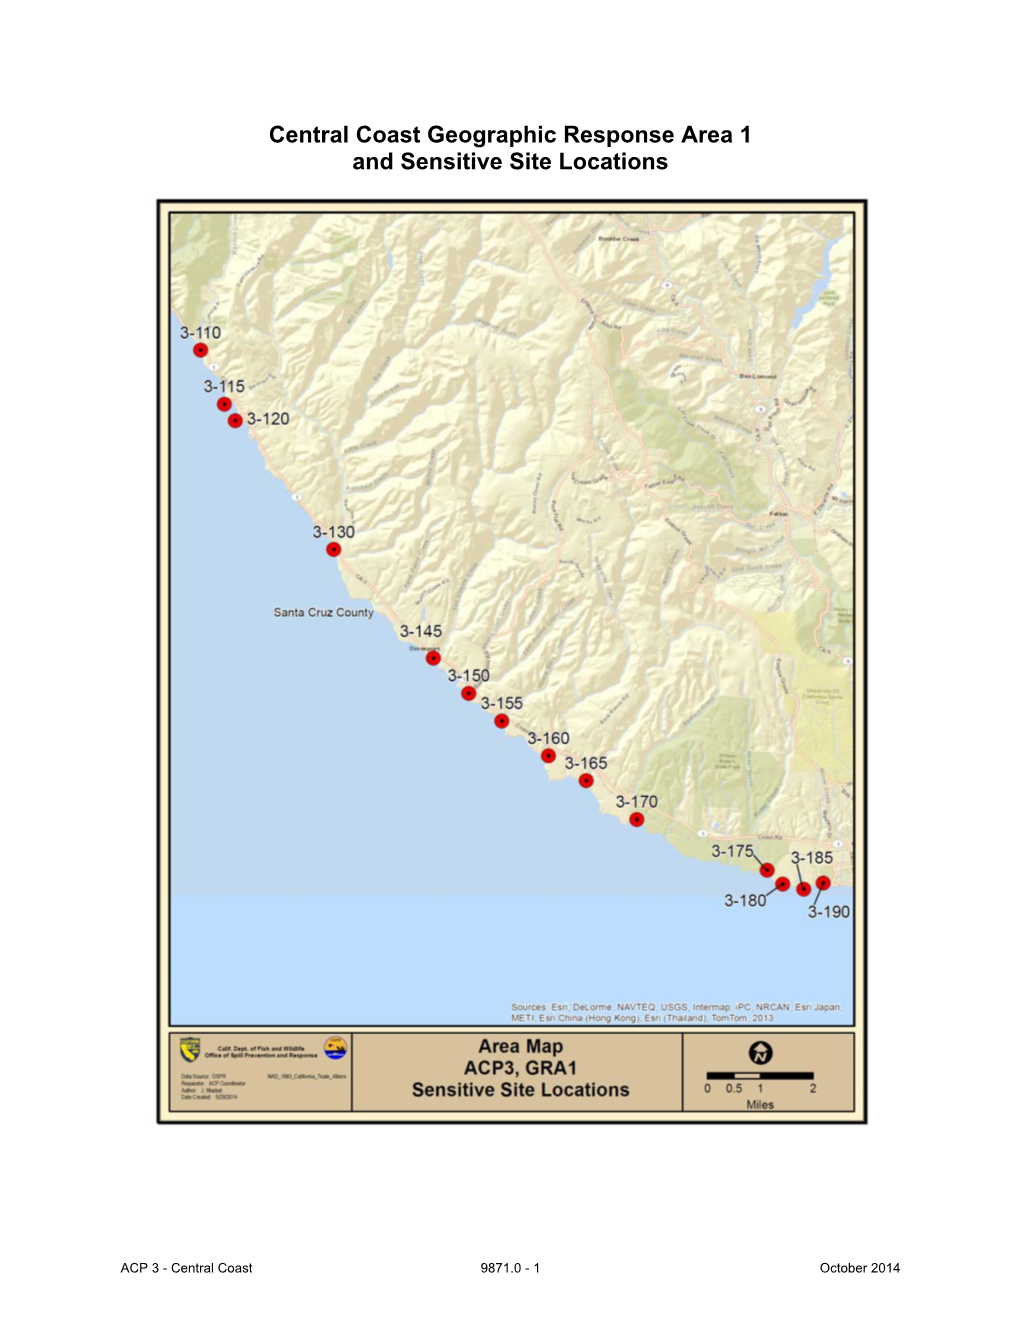 Central Coast Geographic Response Area 1 and Sensitive Site Locations